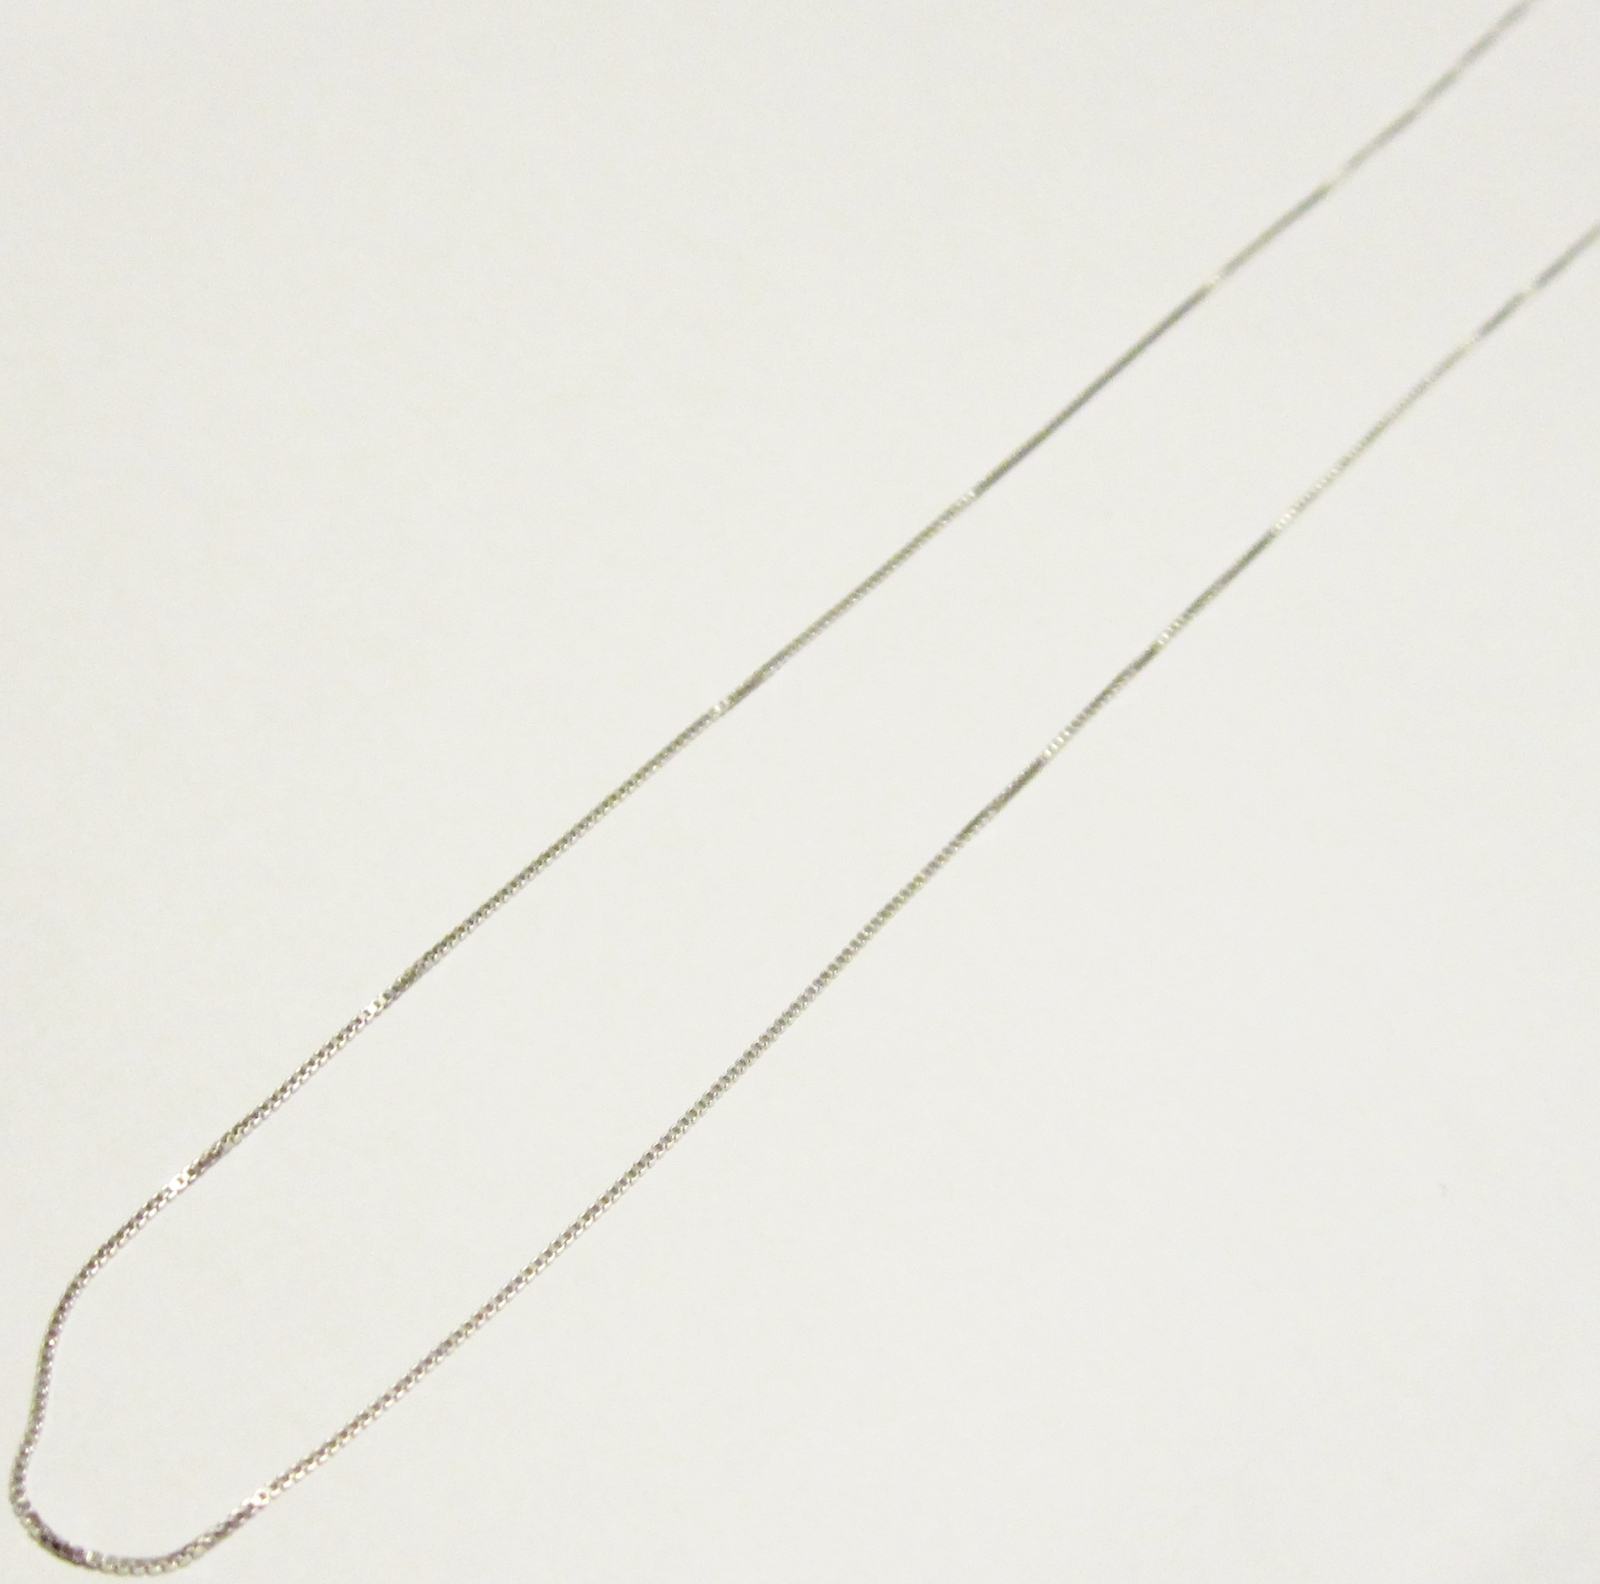 925 NICKEL FREE STERLING SILVER BOX CHAIN, 18" L, 1.6 GRAMS, 1.1 MM - NEW - $25.00